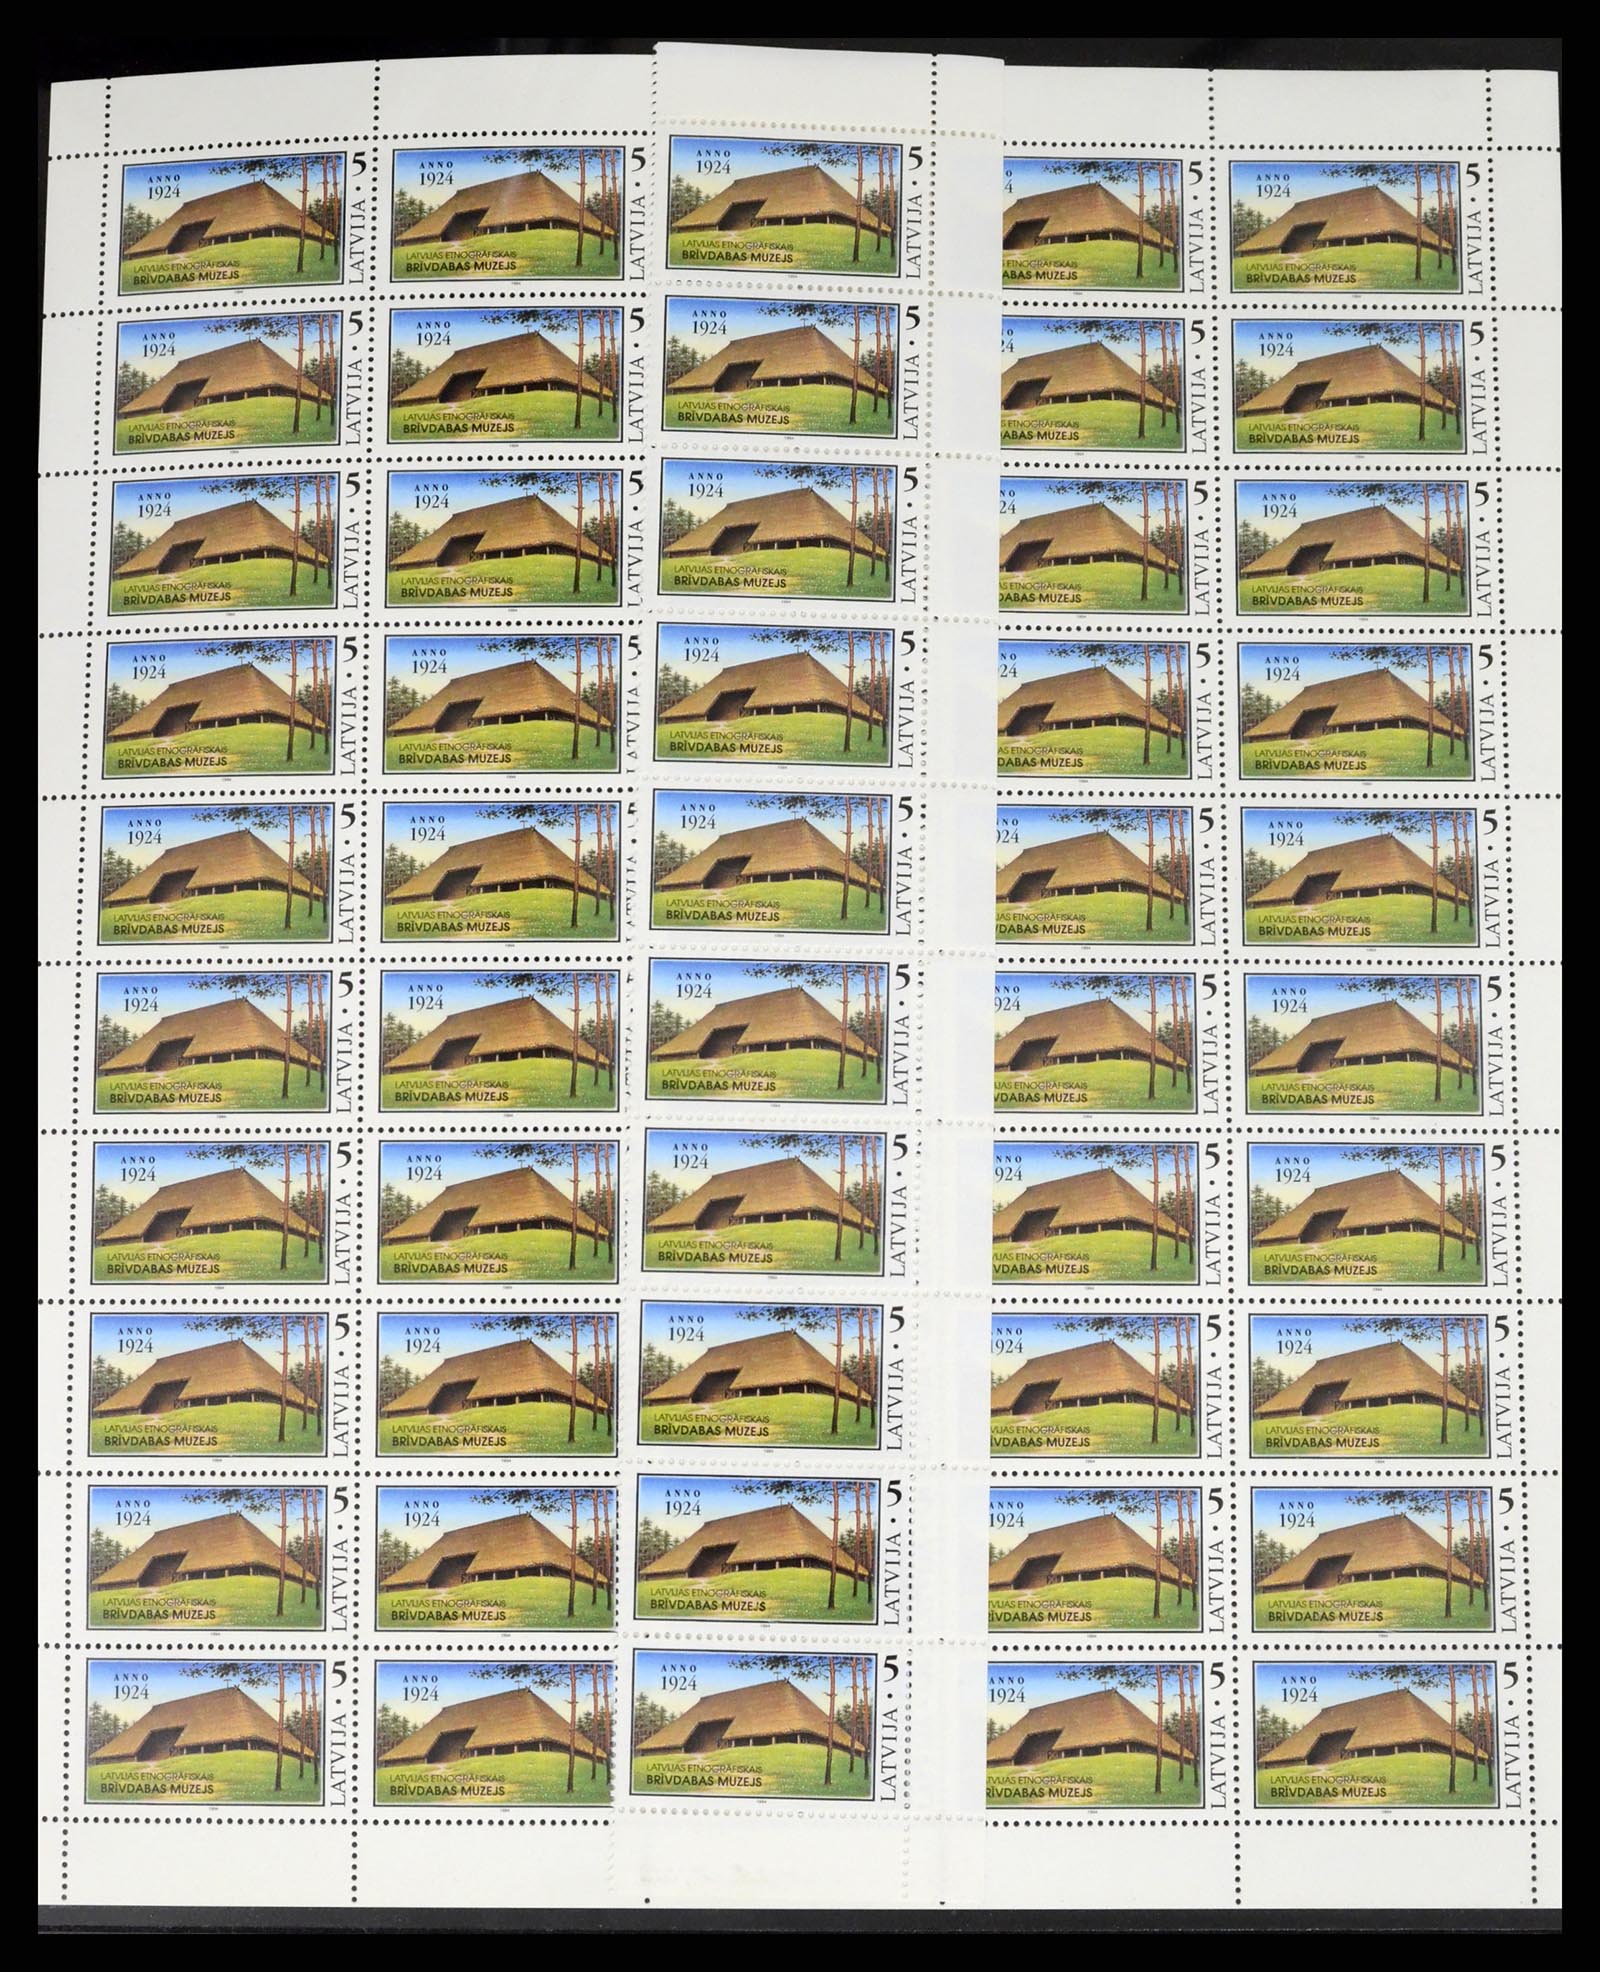 37312 038 - Stamp collection 37312 Latvia and Lithuania 1990-2000.